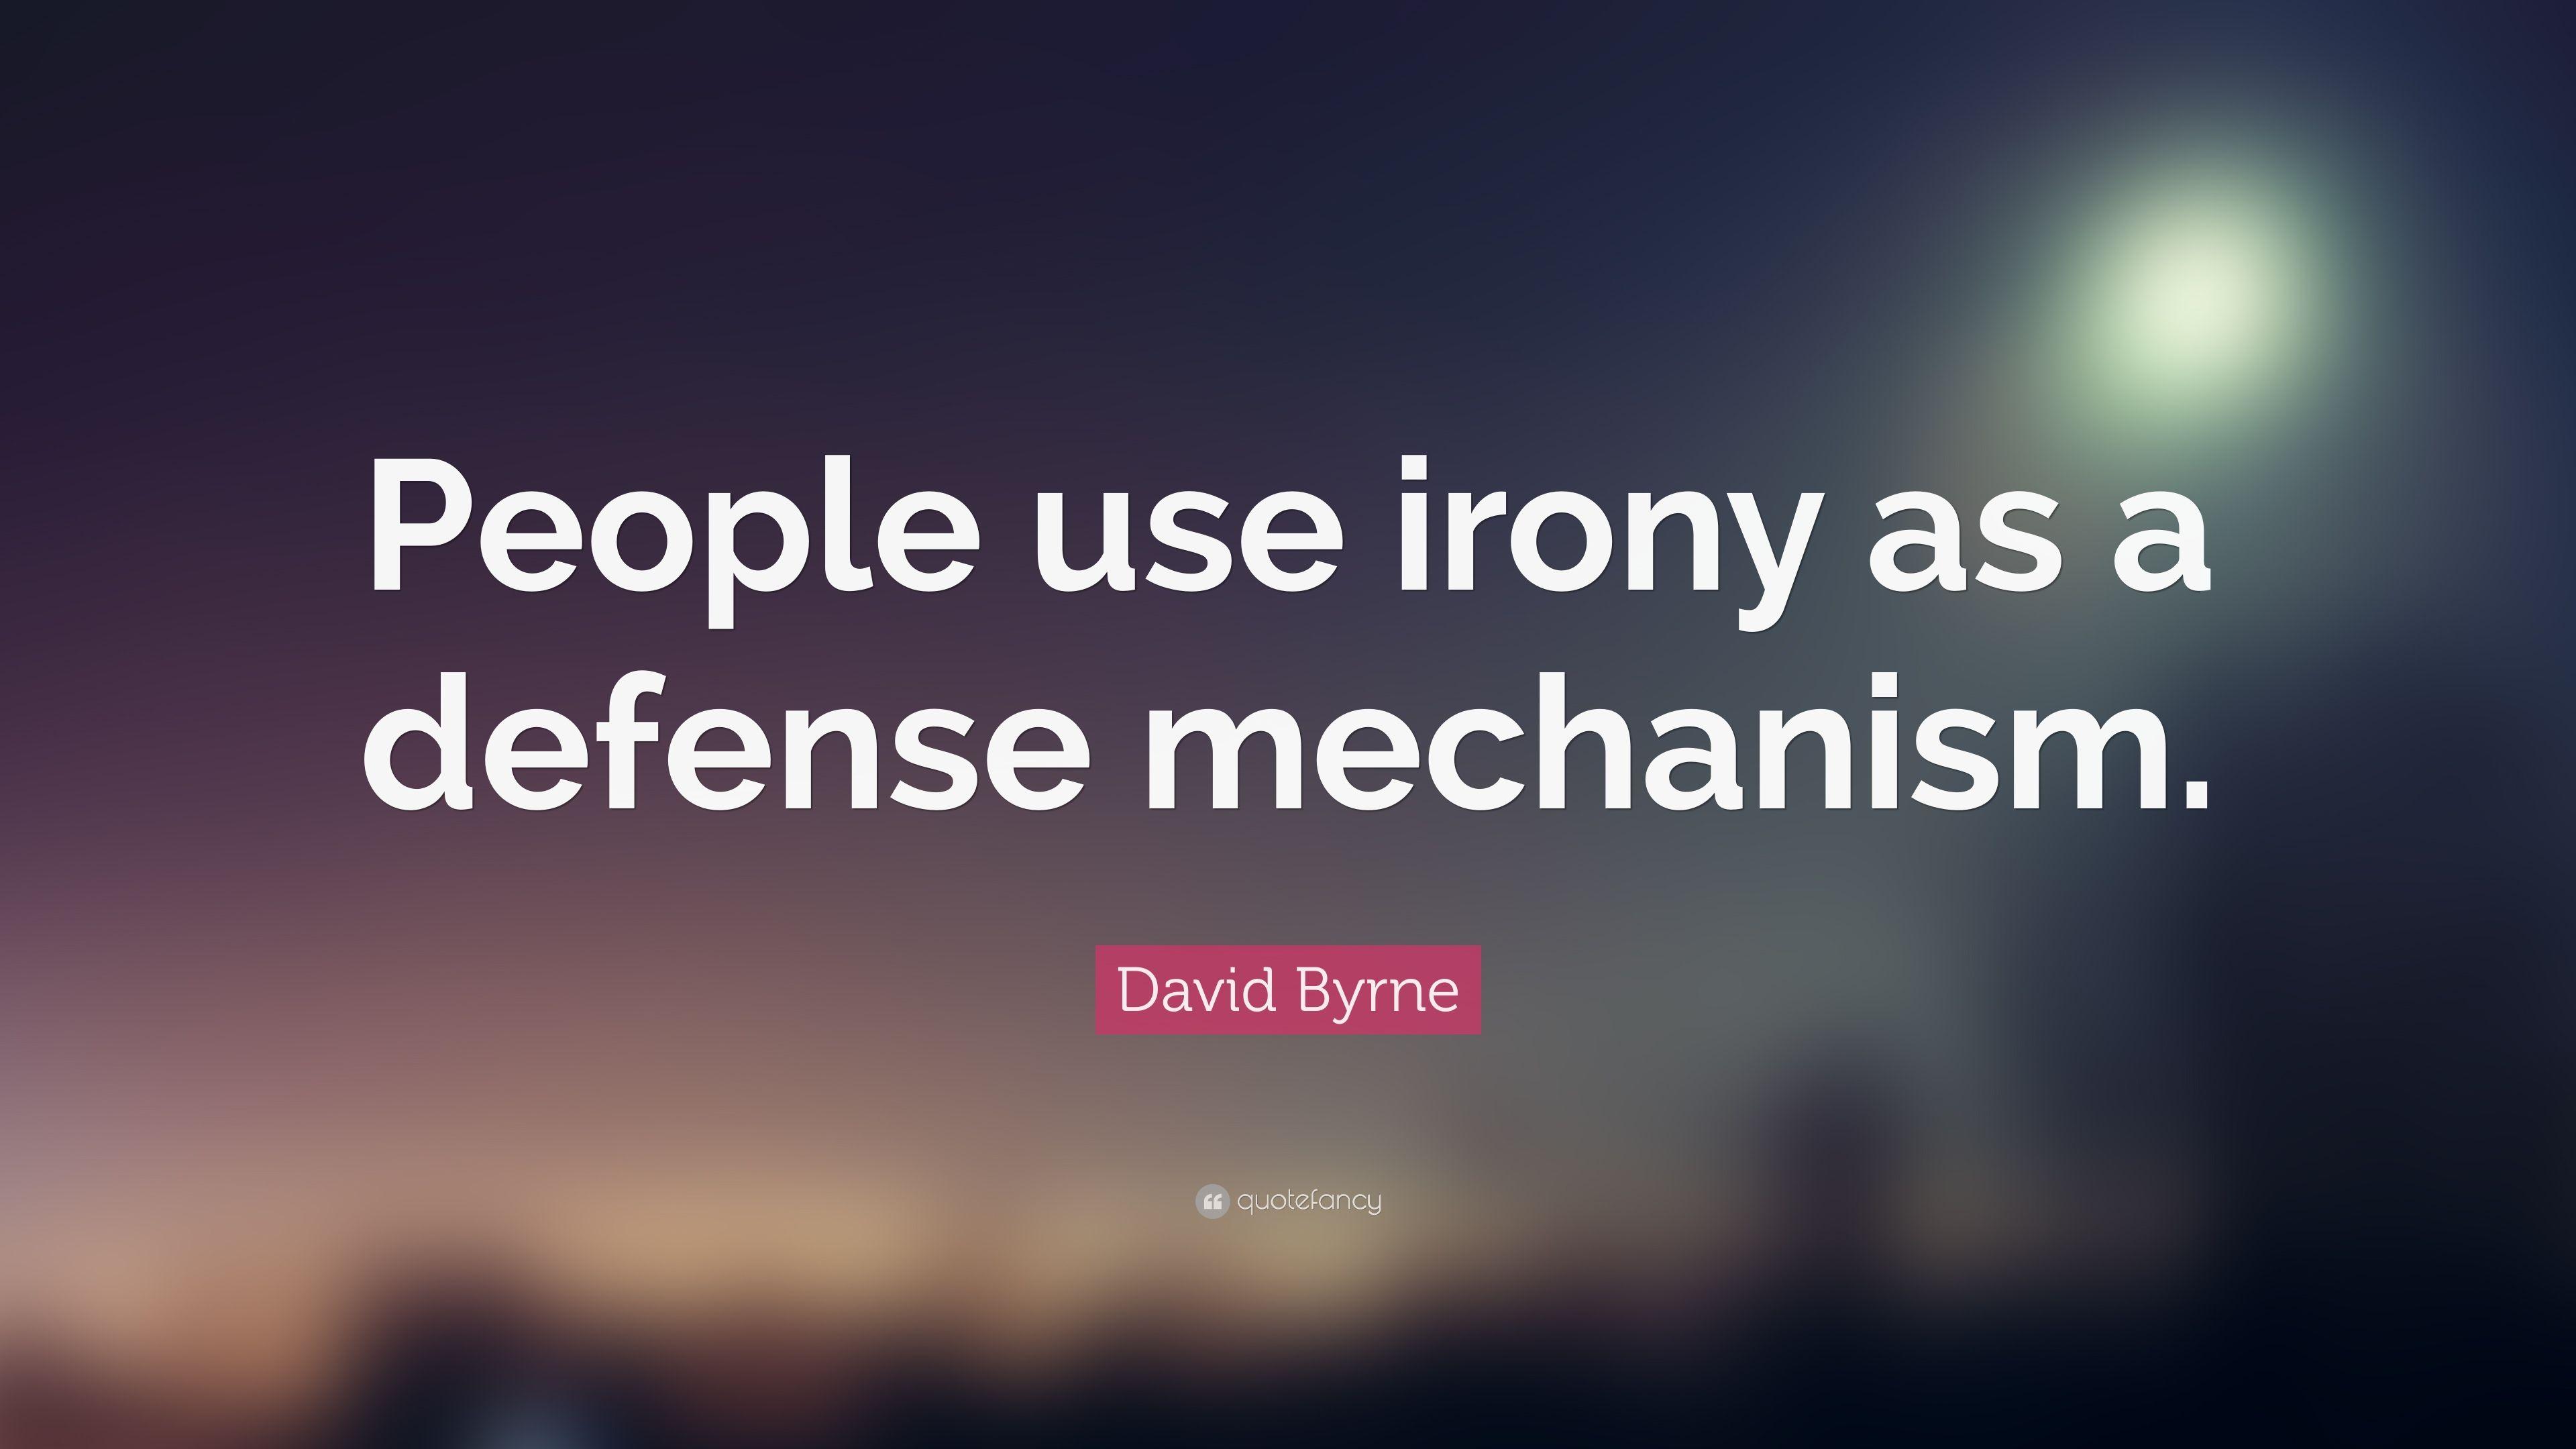 David Byrne Quote: “People use irony as a defense mechanism.” 6